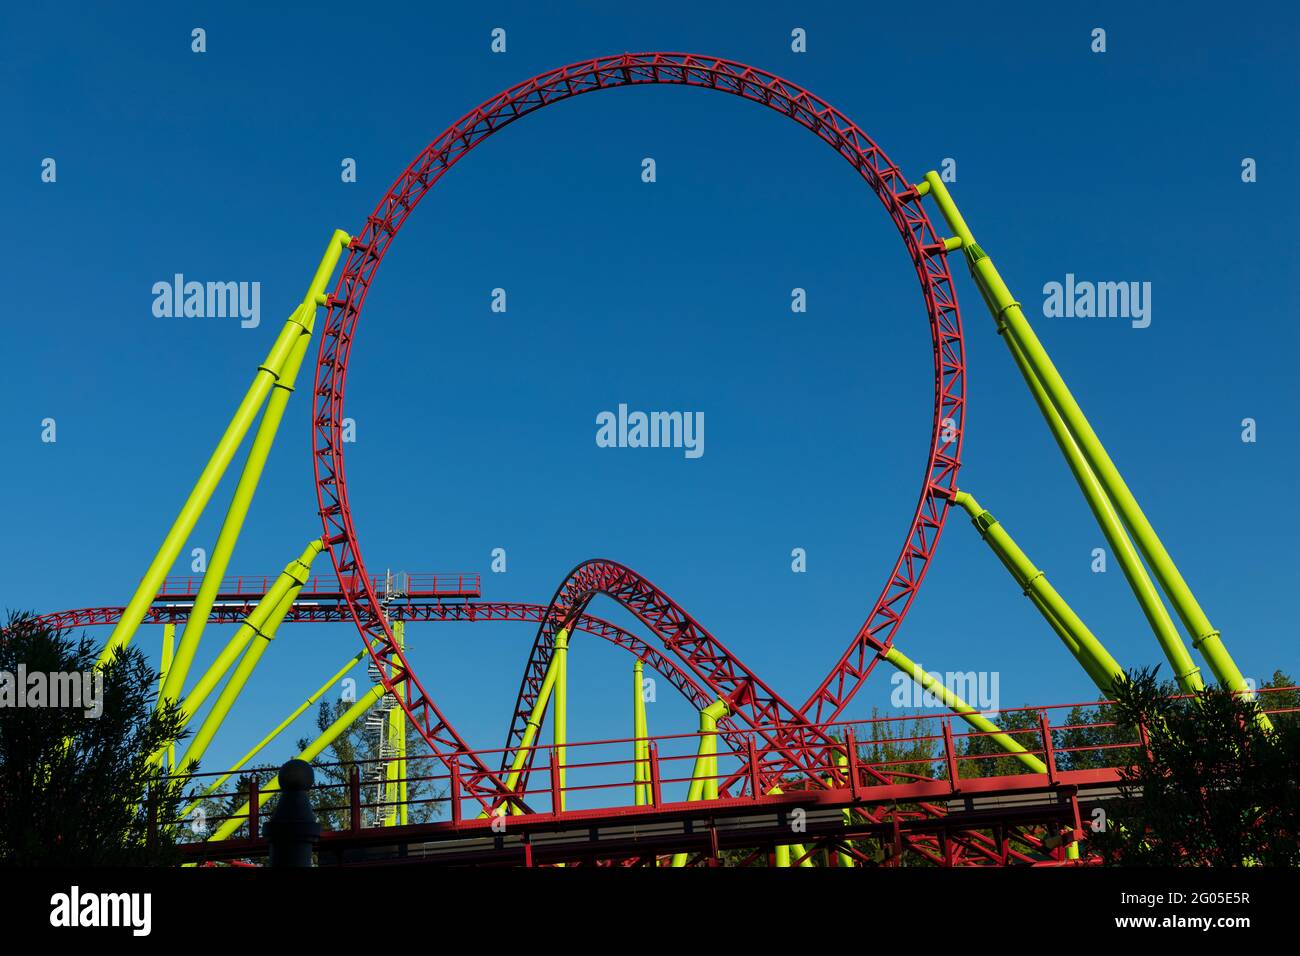 Red roller coaster loop with yellow pillars on blue sky background Stock Photo